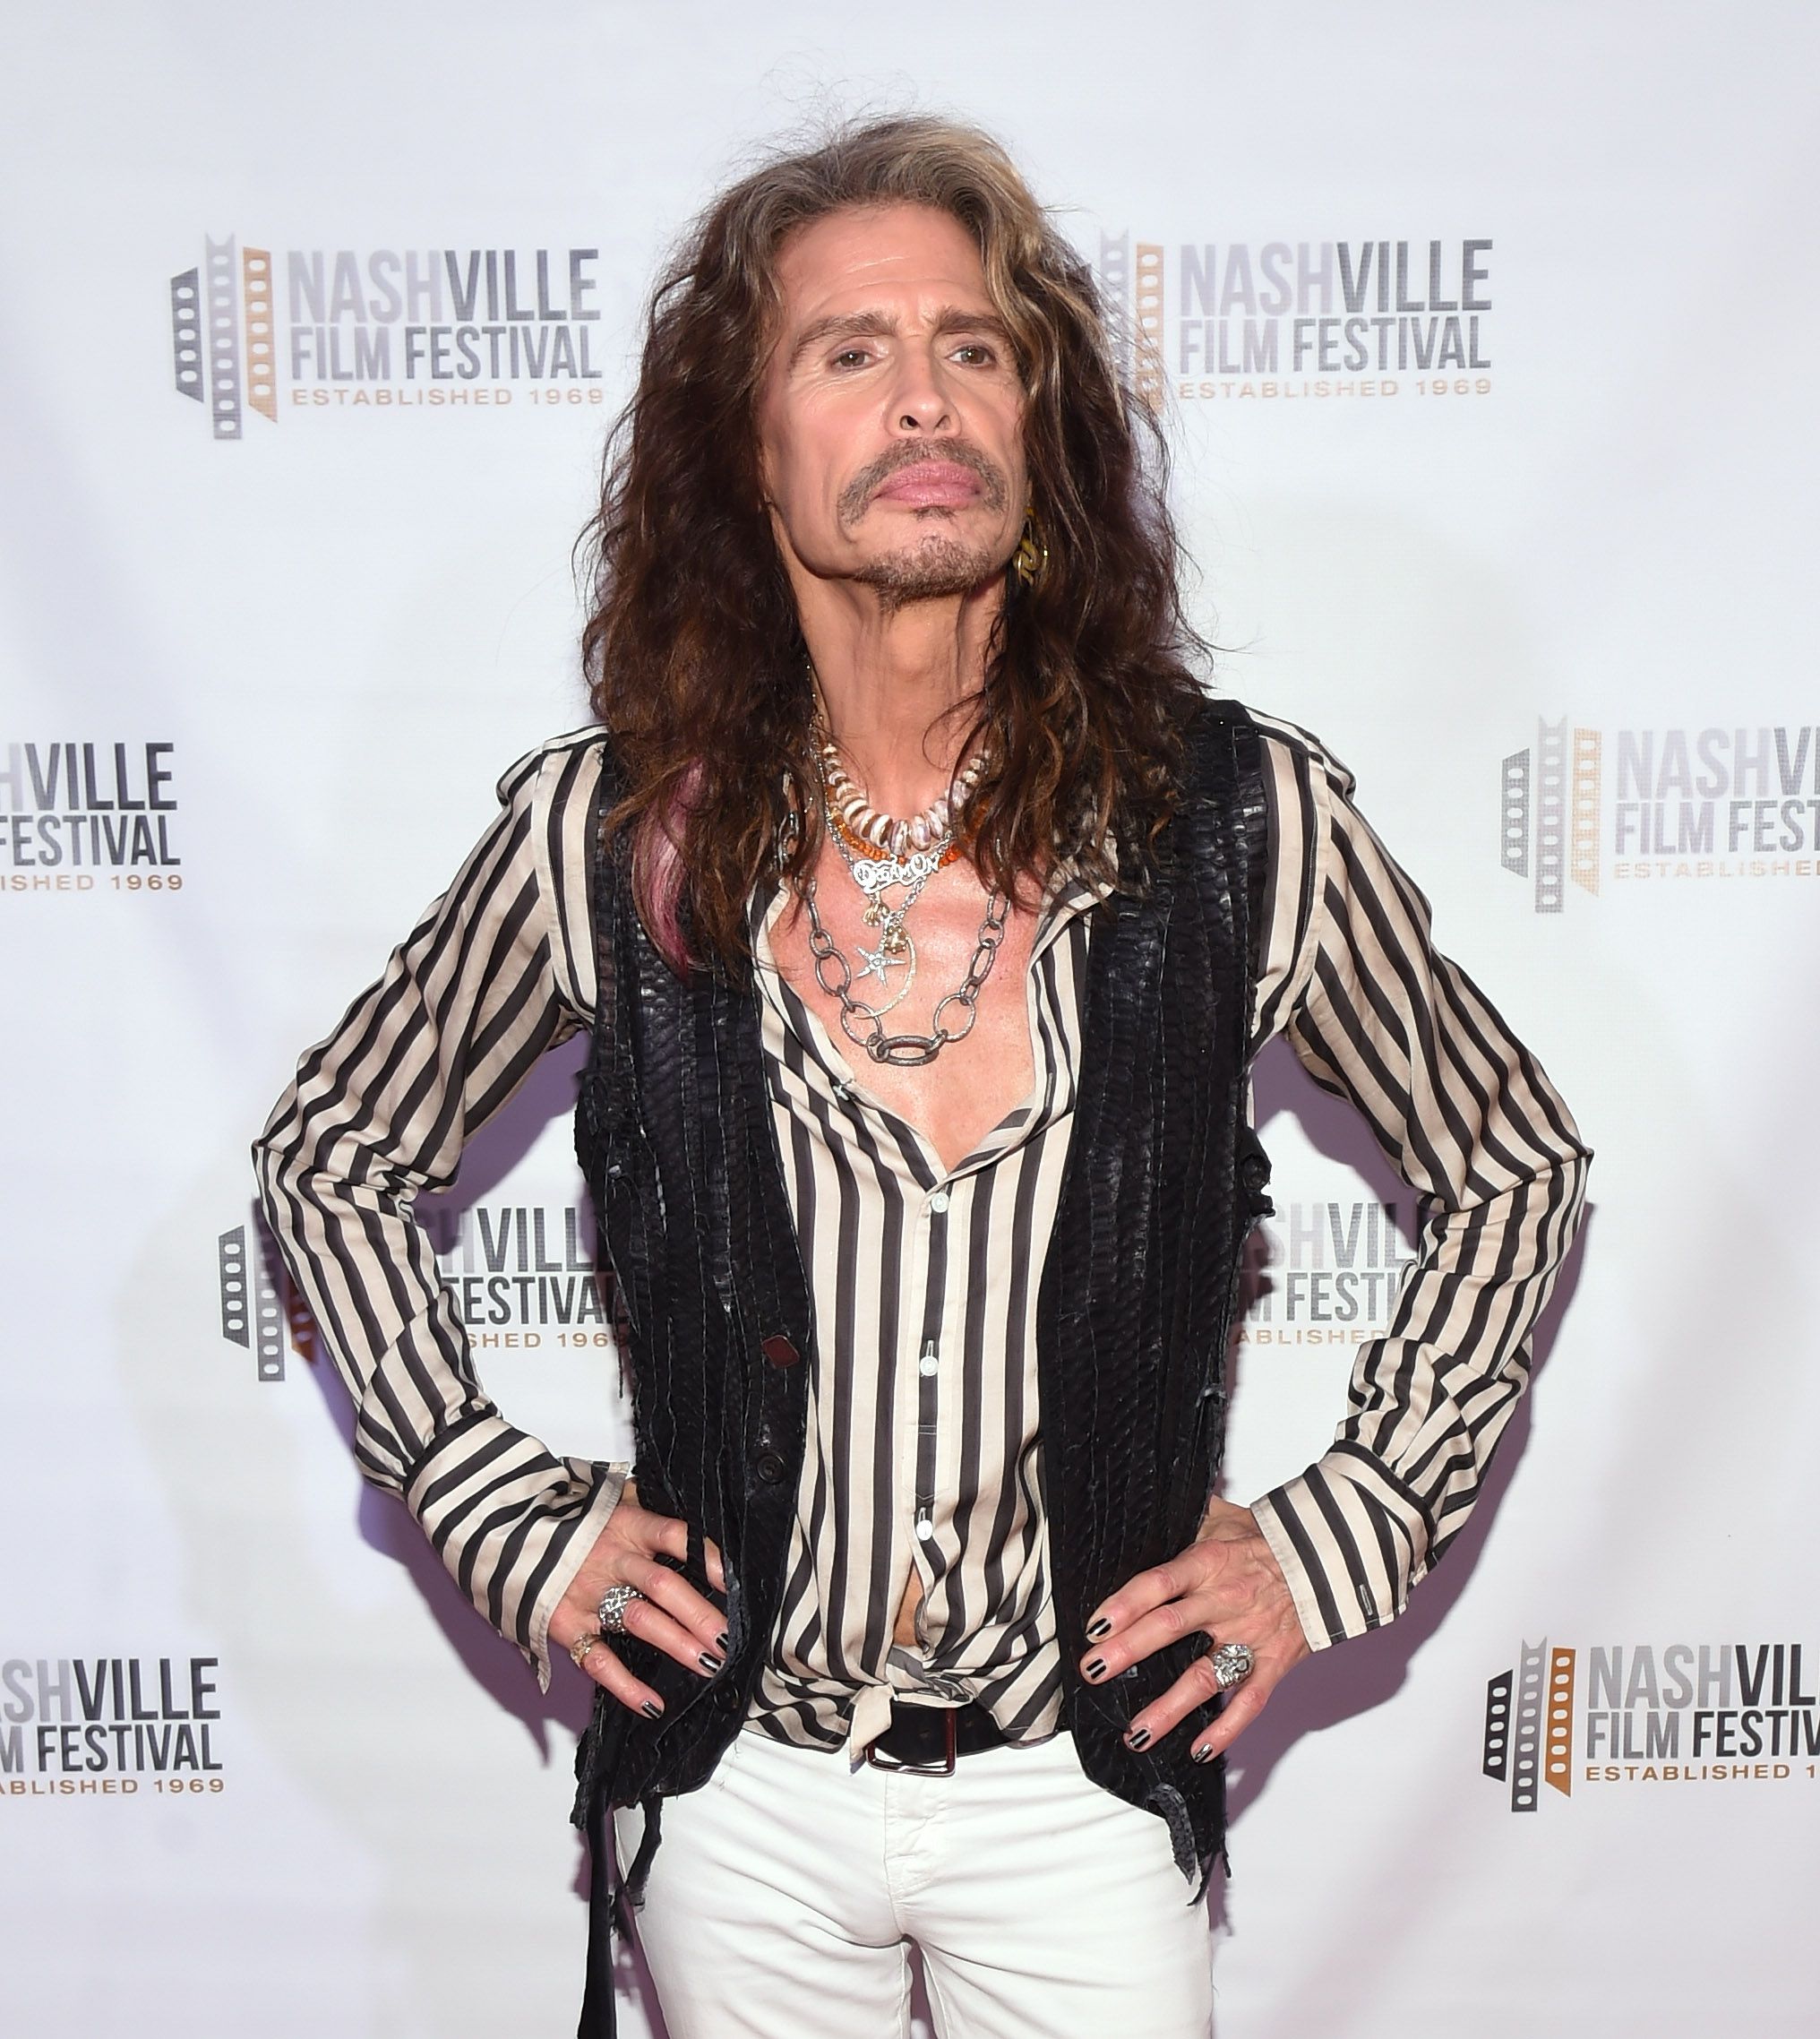 NASHVILLE, TN - MAY 10: Steven Tyler attends the 49th Annual Nashville Film Festival - 'Steven Tyler: Out On A Limb' World Premiere on May 10, 2018 in Nashville, Tennessee. (Photo by Jason Kempin/Getty Images)